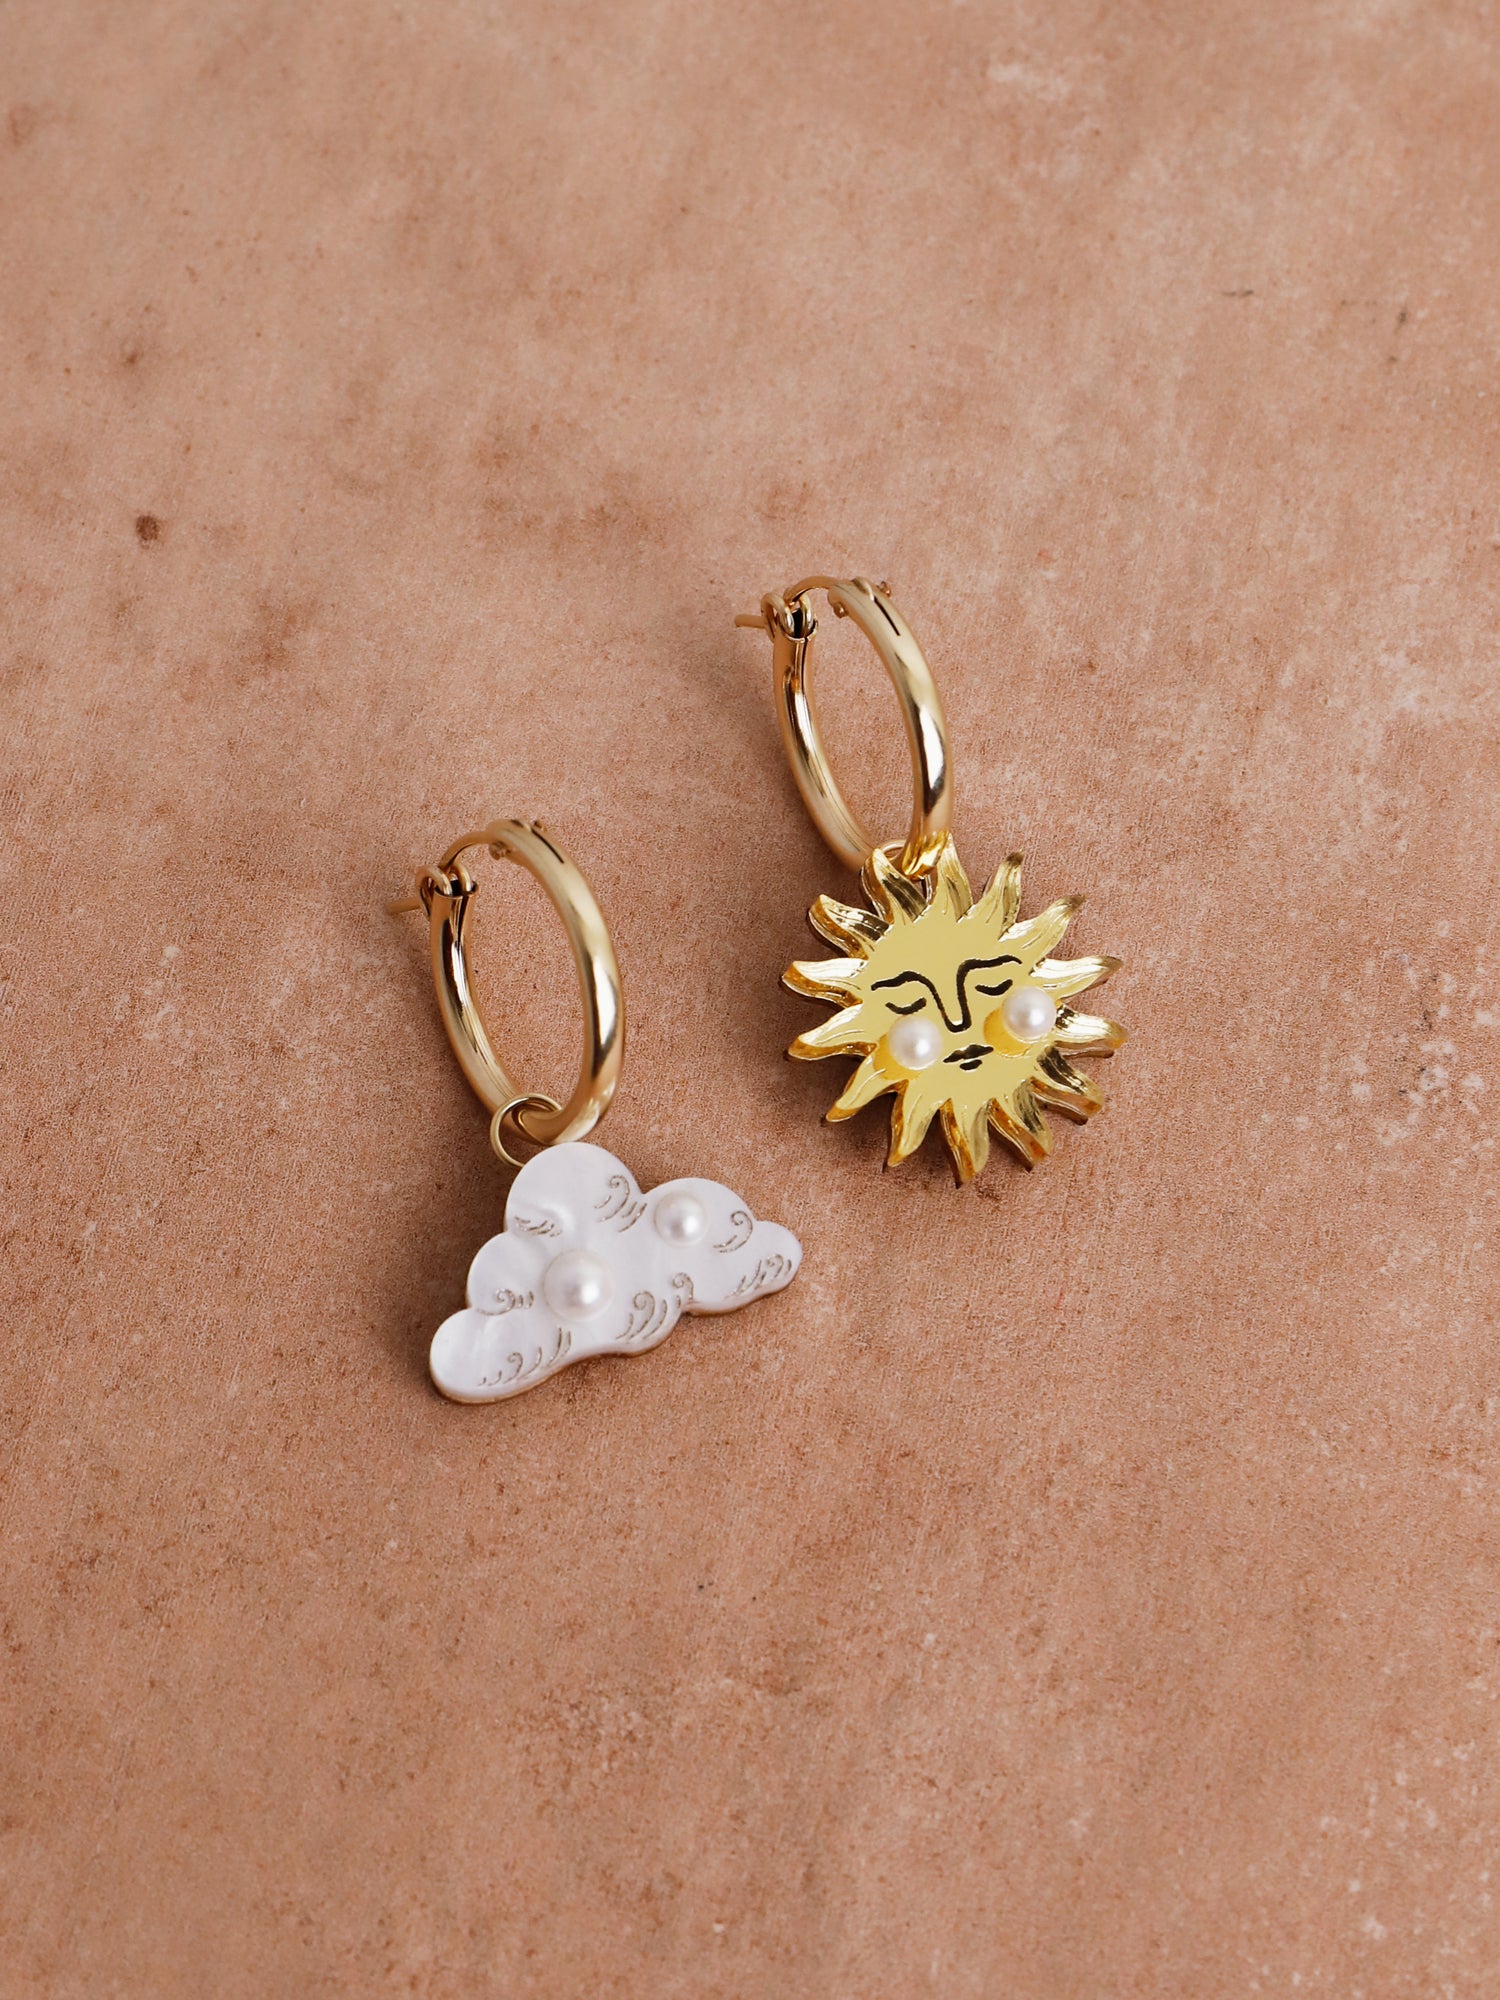 Sun & Cloud Hoops. Charm earrings made with laser cut acrylic, Czech glass pearls and hand inked details. Handmade in the UK by Wolf & Moon.